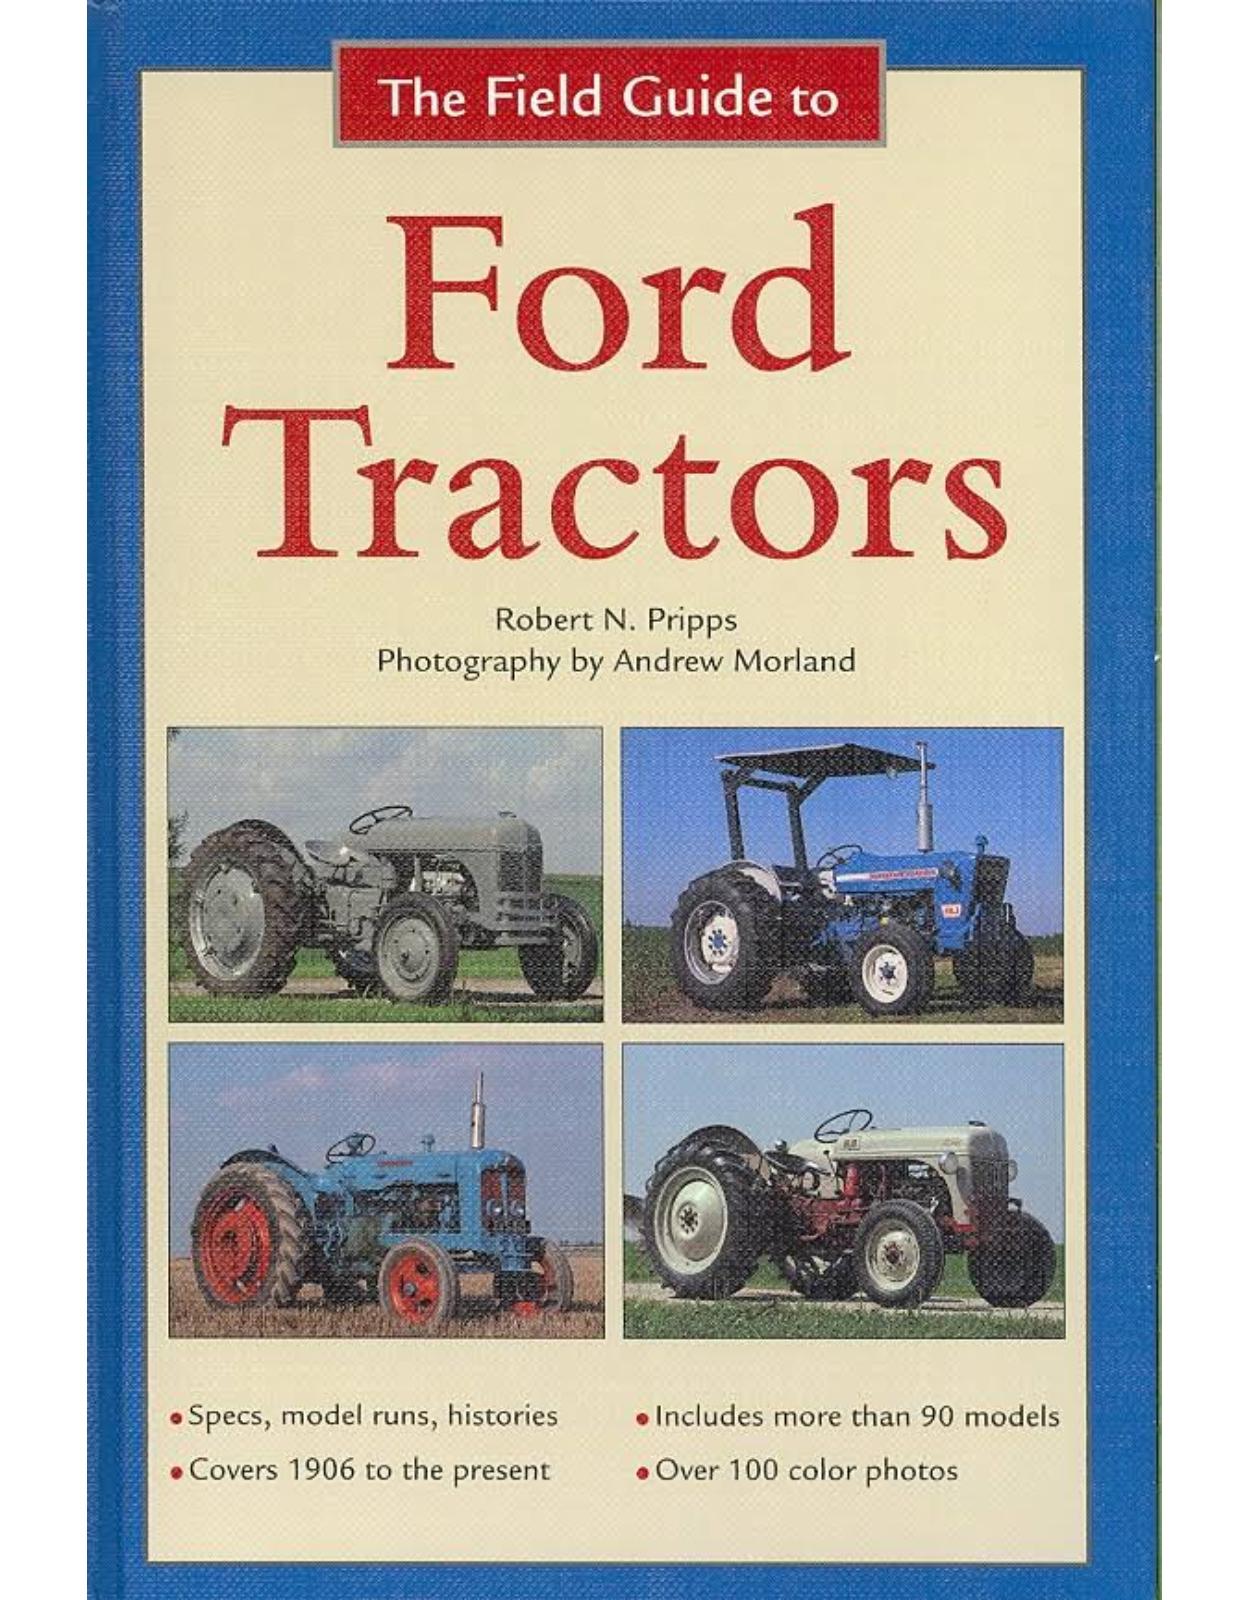 The Field Guide to Ford Tractors